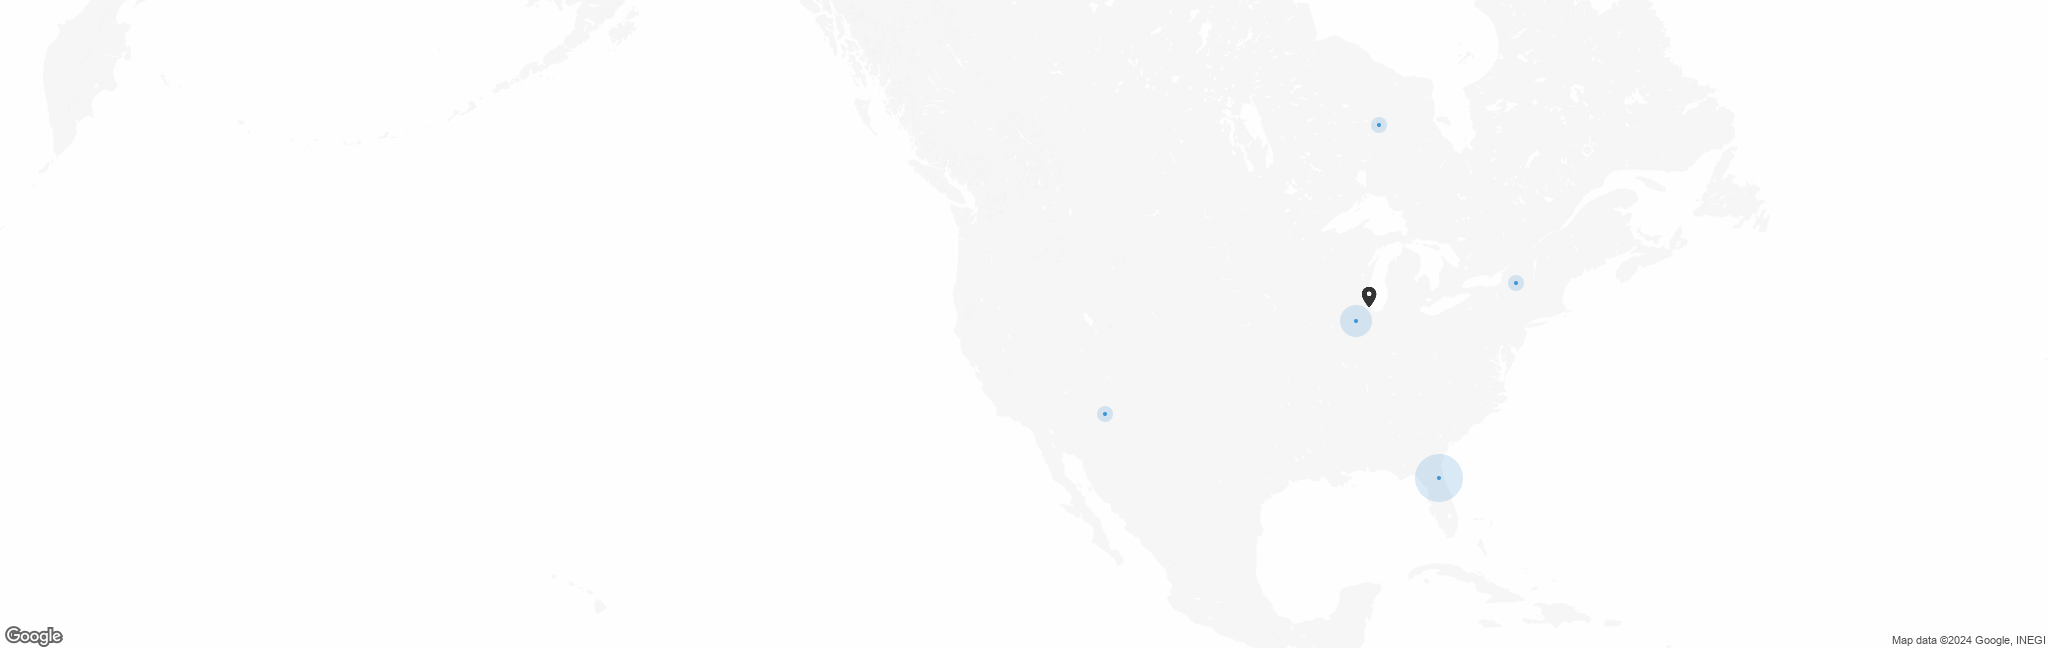 Map of US with pin of Codo A Codo Internacional location